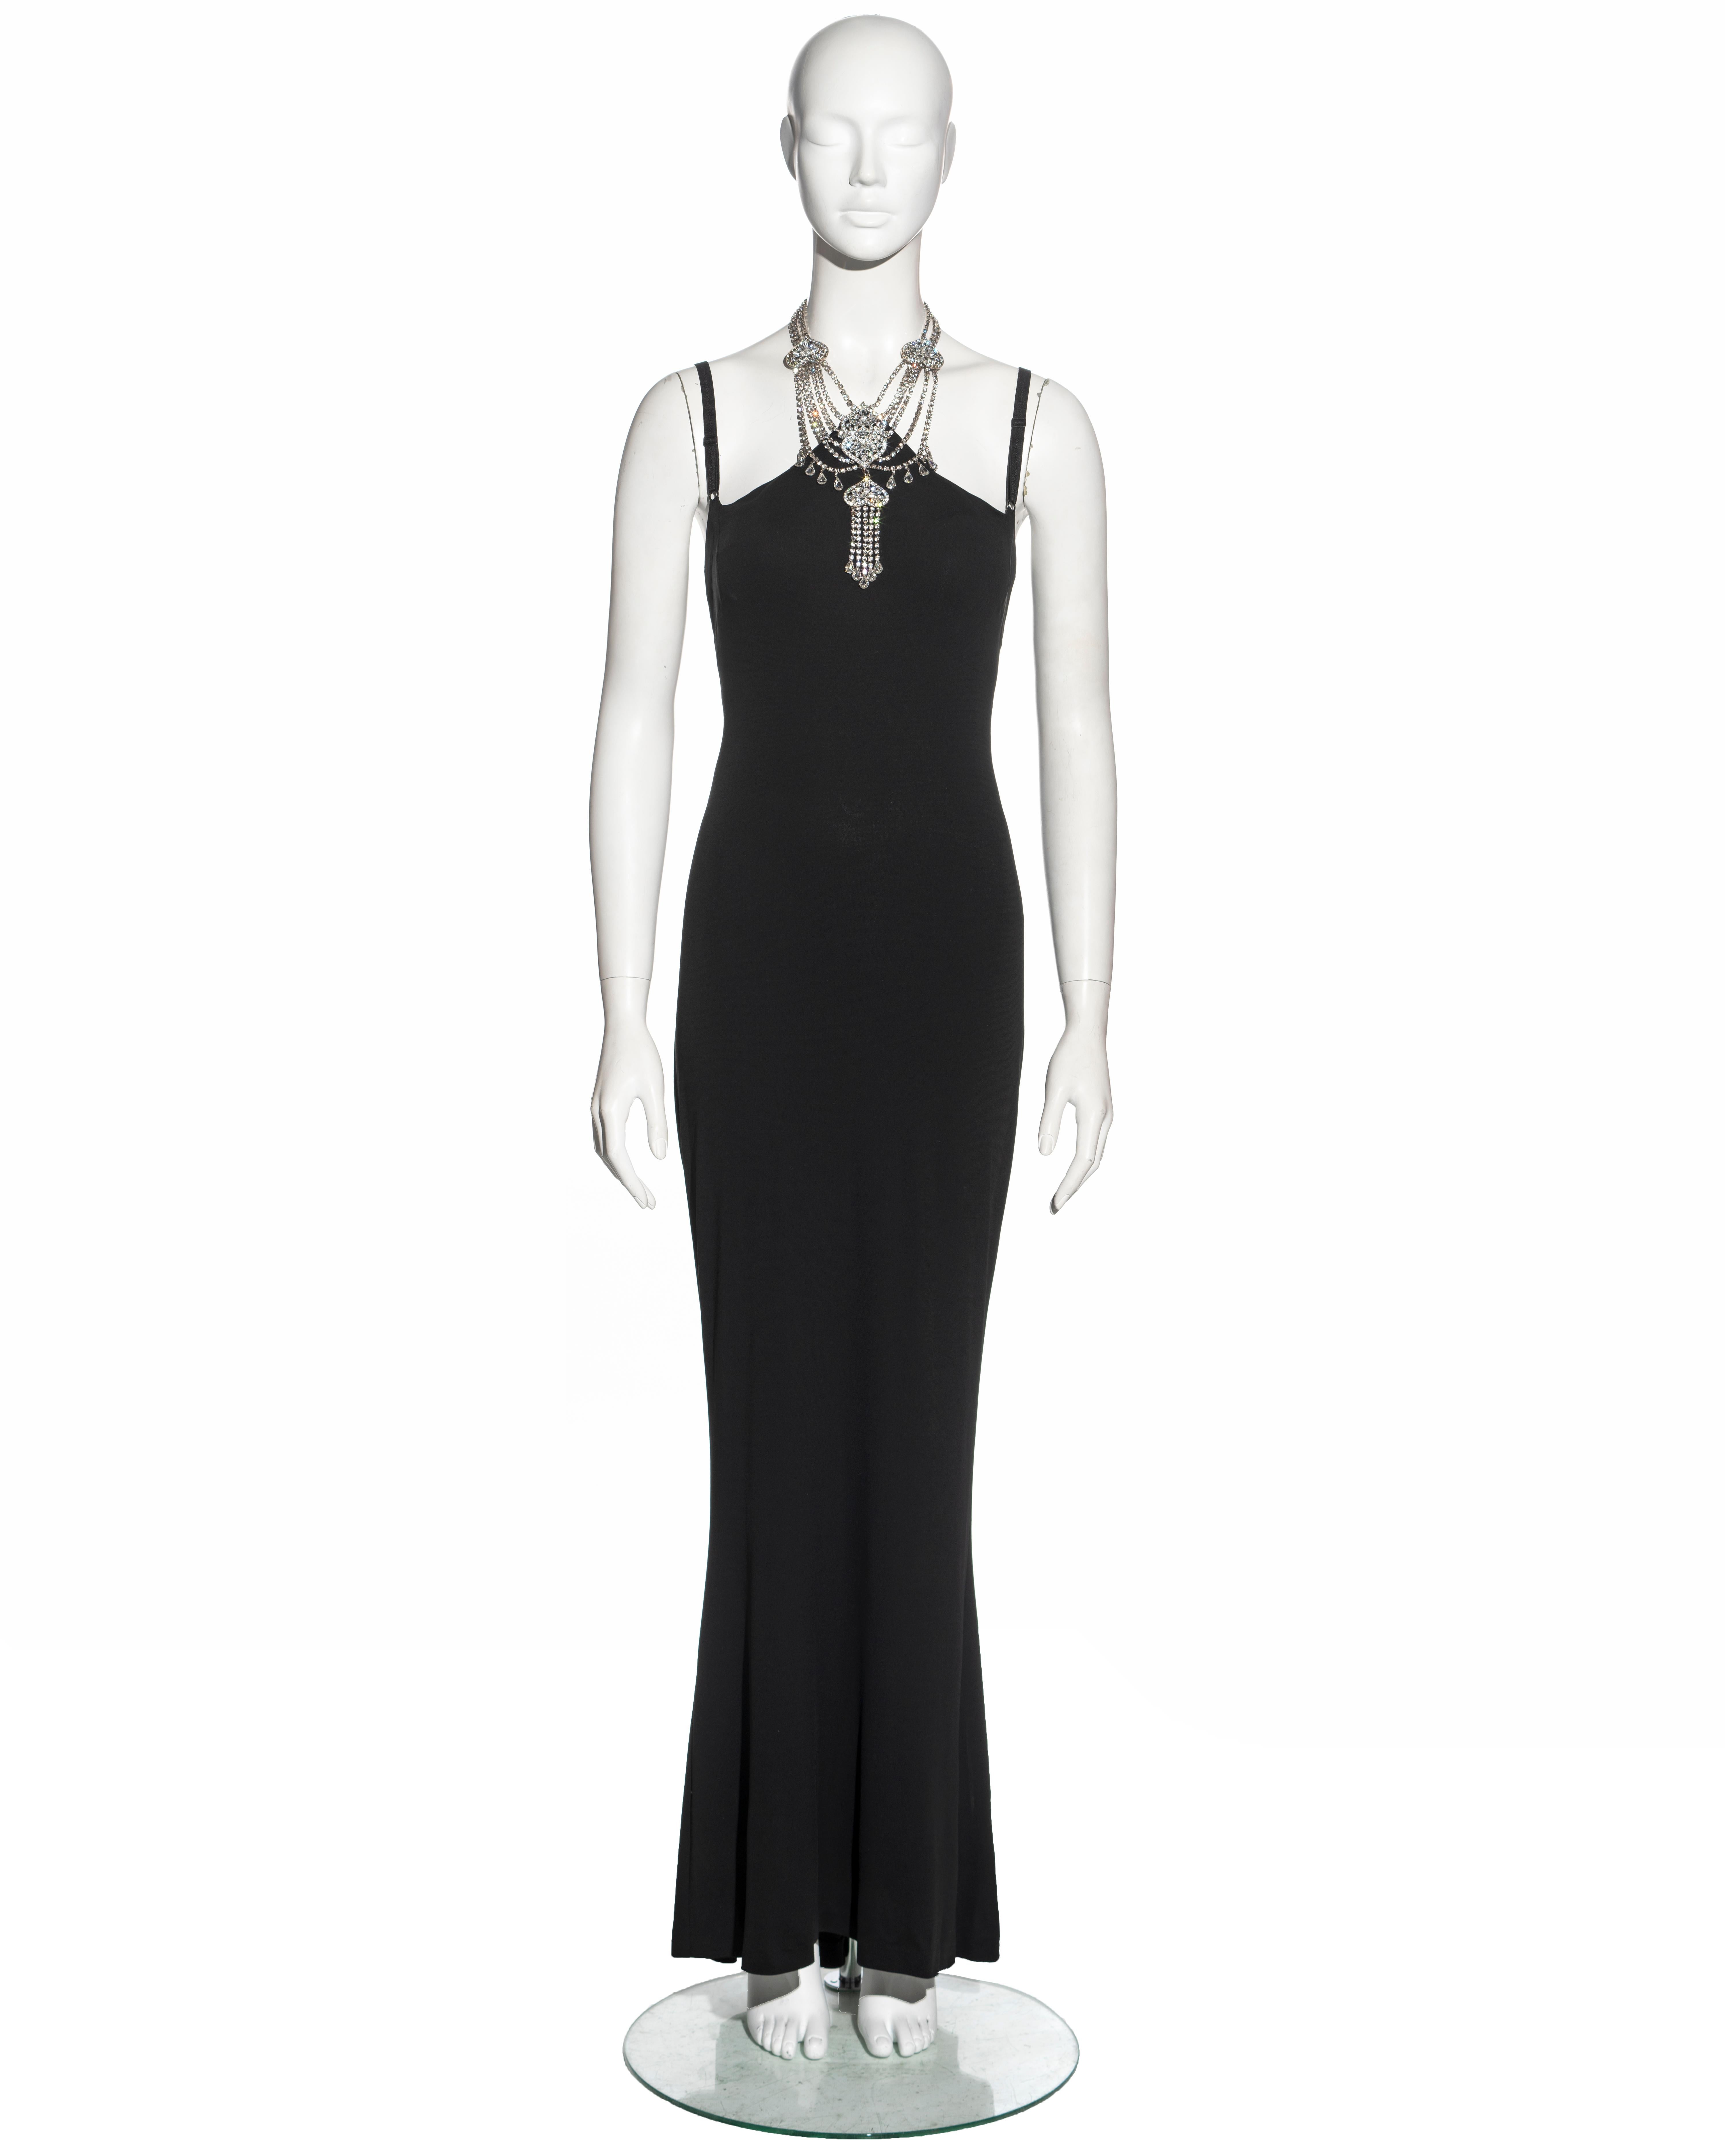 ▪ Dolce & Gabbana evening dress
▪ Sold by One of a Kind Archive
▪ Constructed from black rayon and spandex jersey 
▪ Built-in silk bra with adjustable shoulder straps
▪ Integrated crystal choker necklace 
▪ Ruched seam on the centre-back seam 
▪